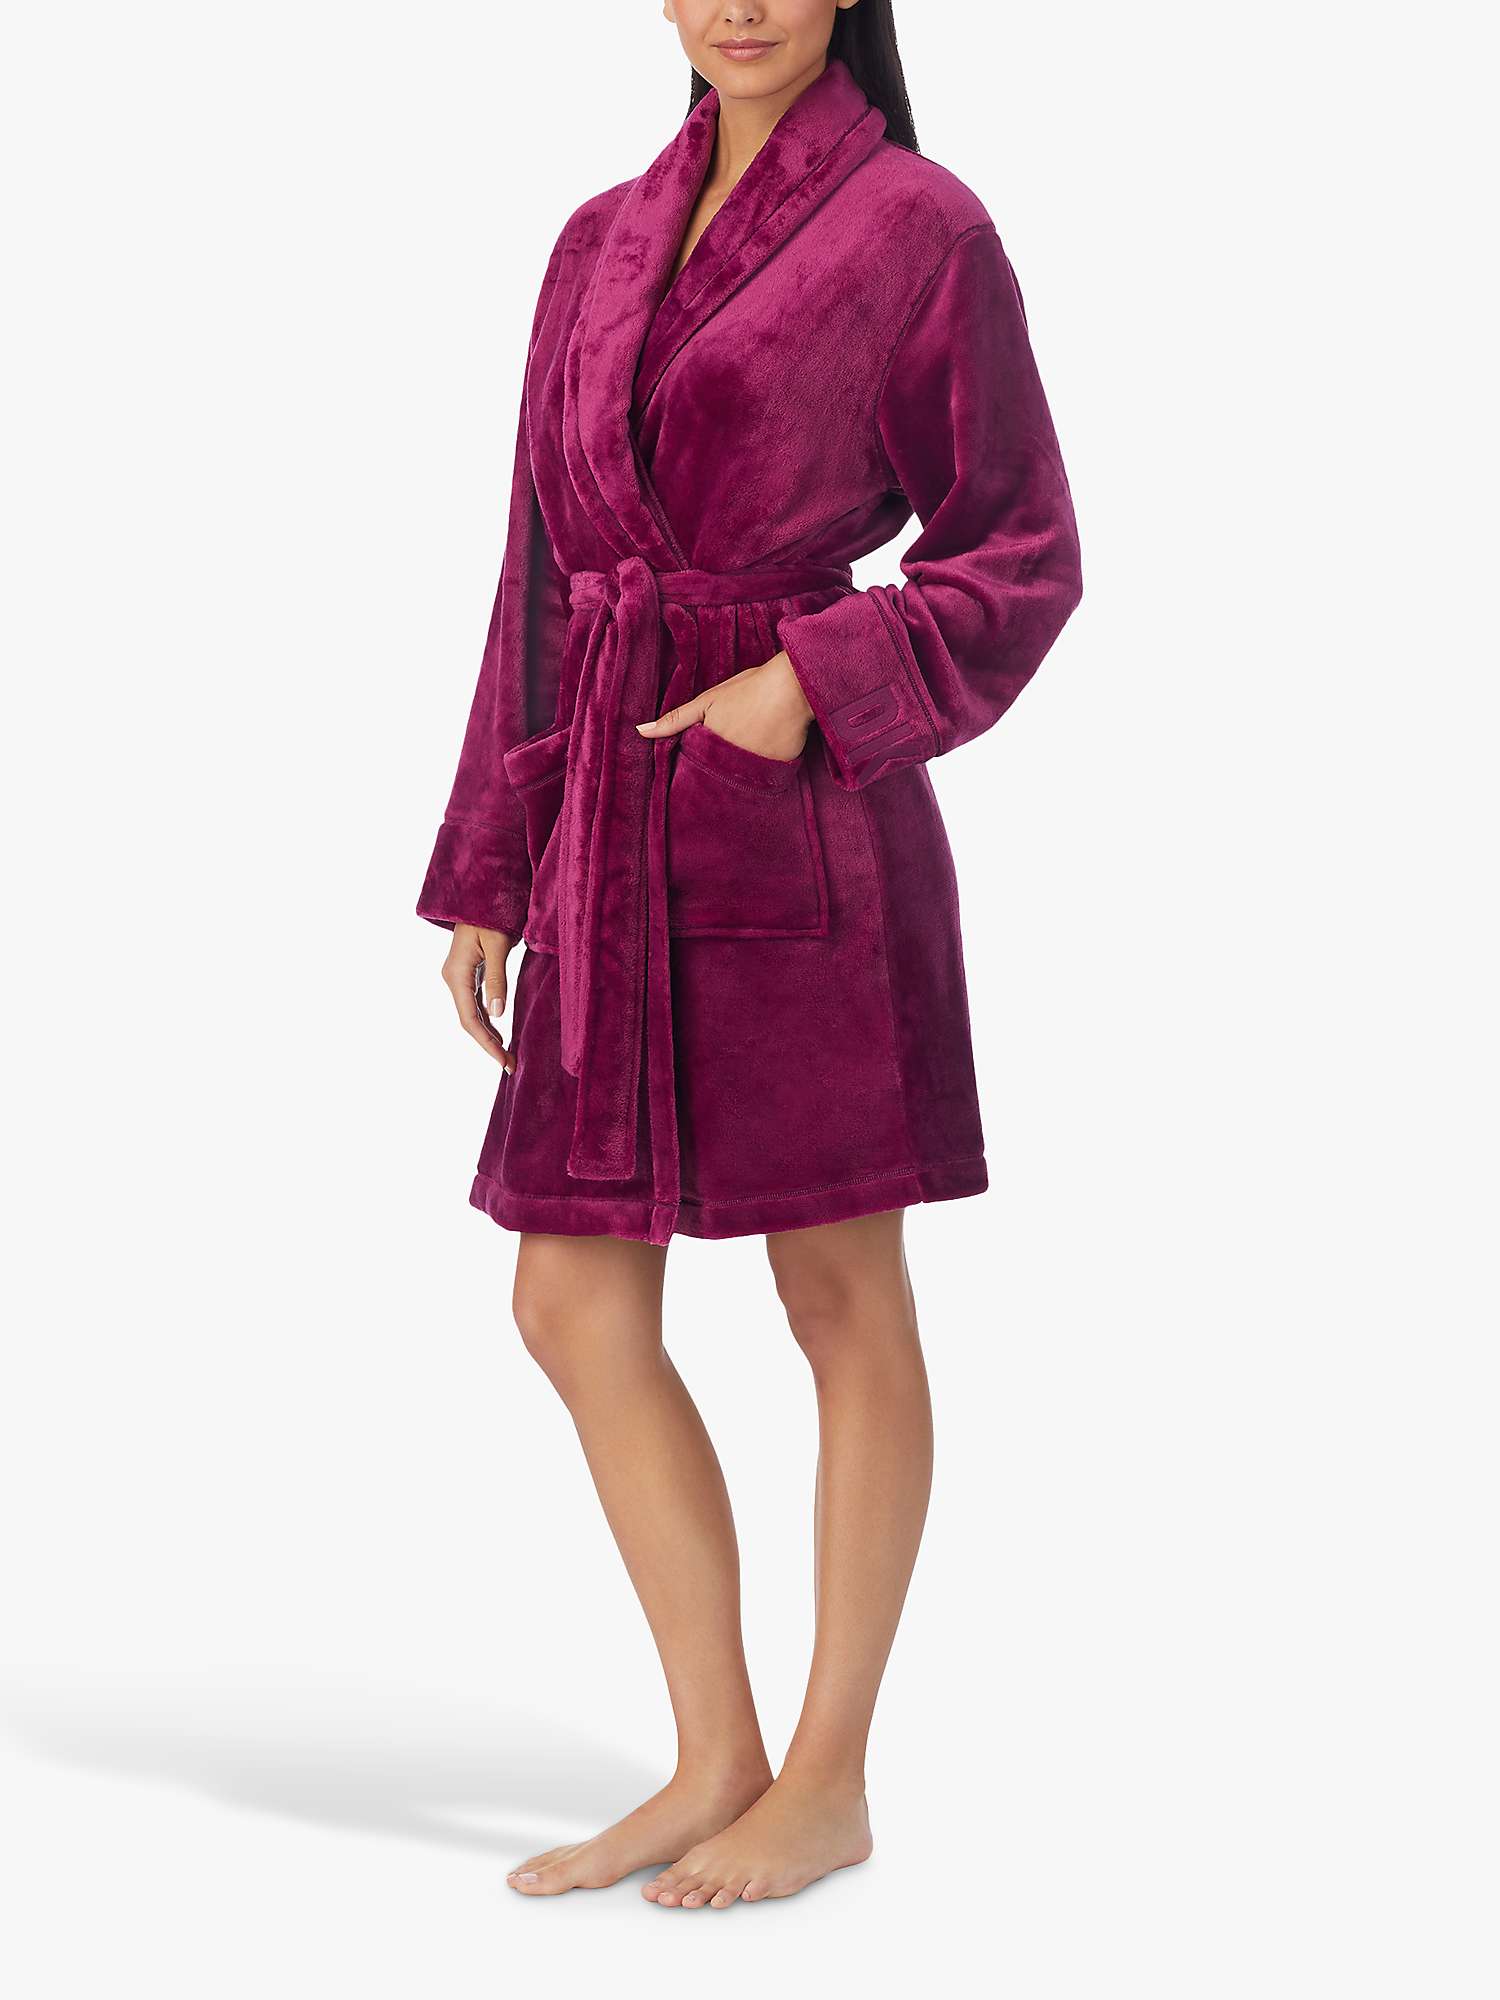 Buy DKNY Soft Fleece Embroidered Robe, Purple Online at johnlewis.com